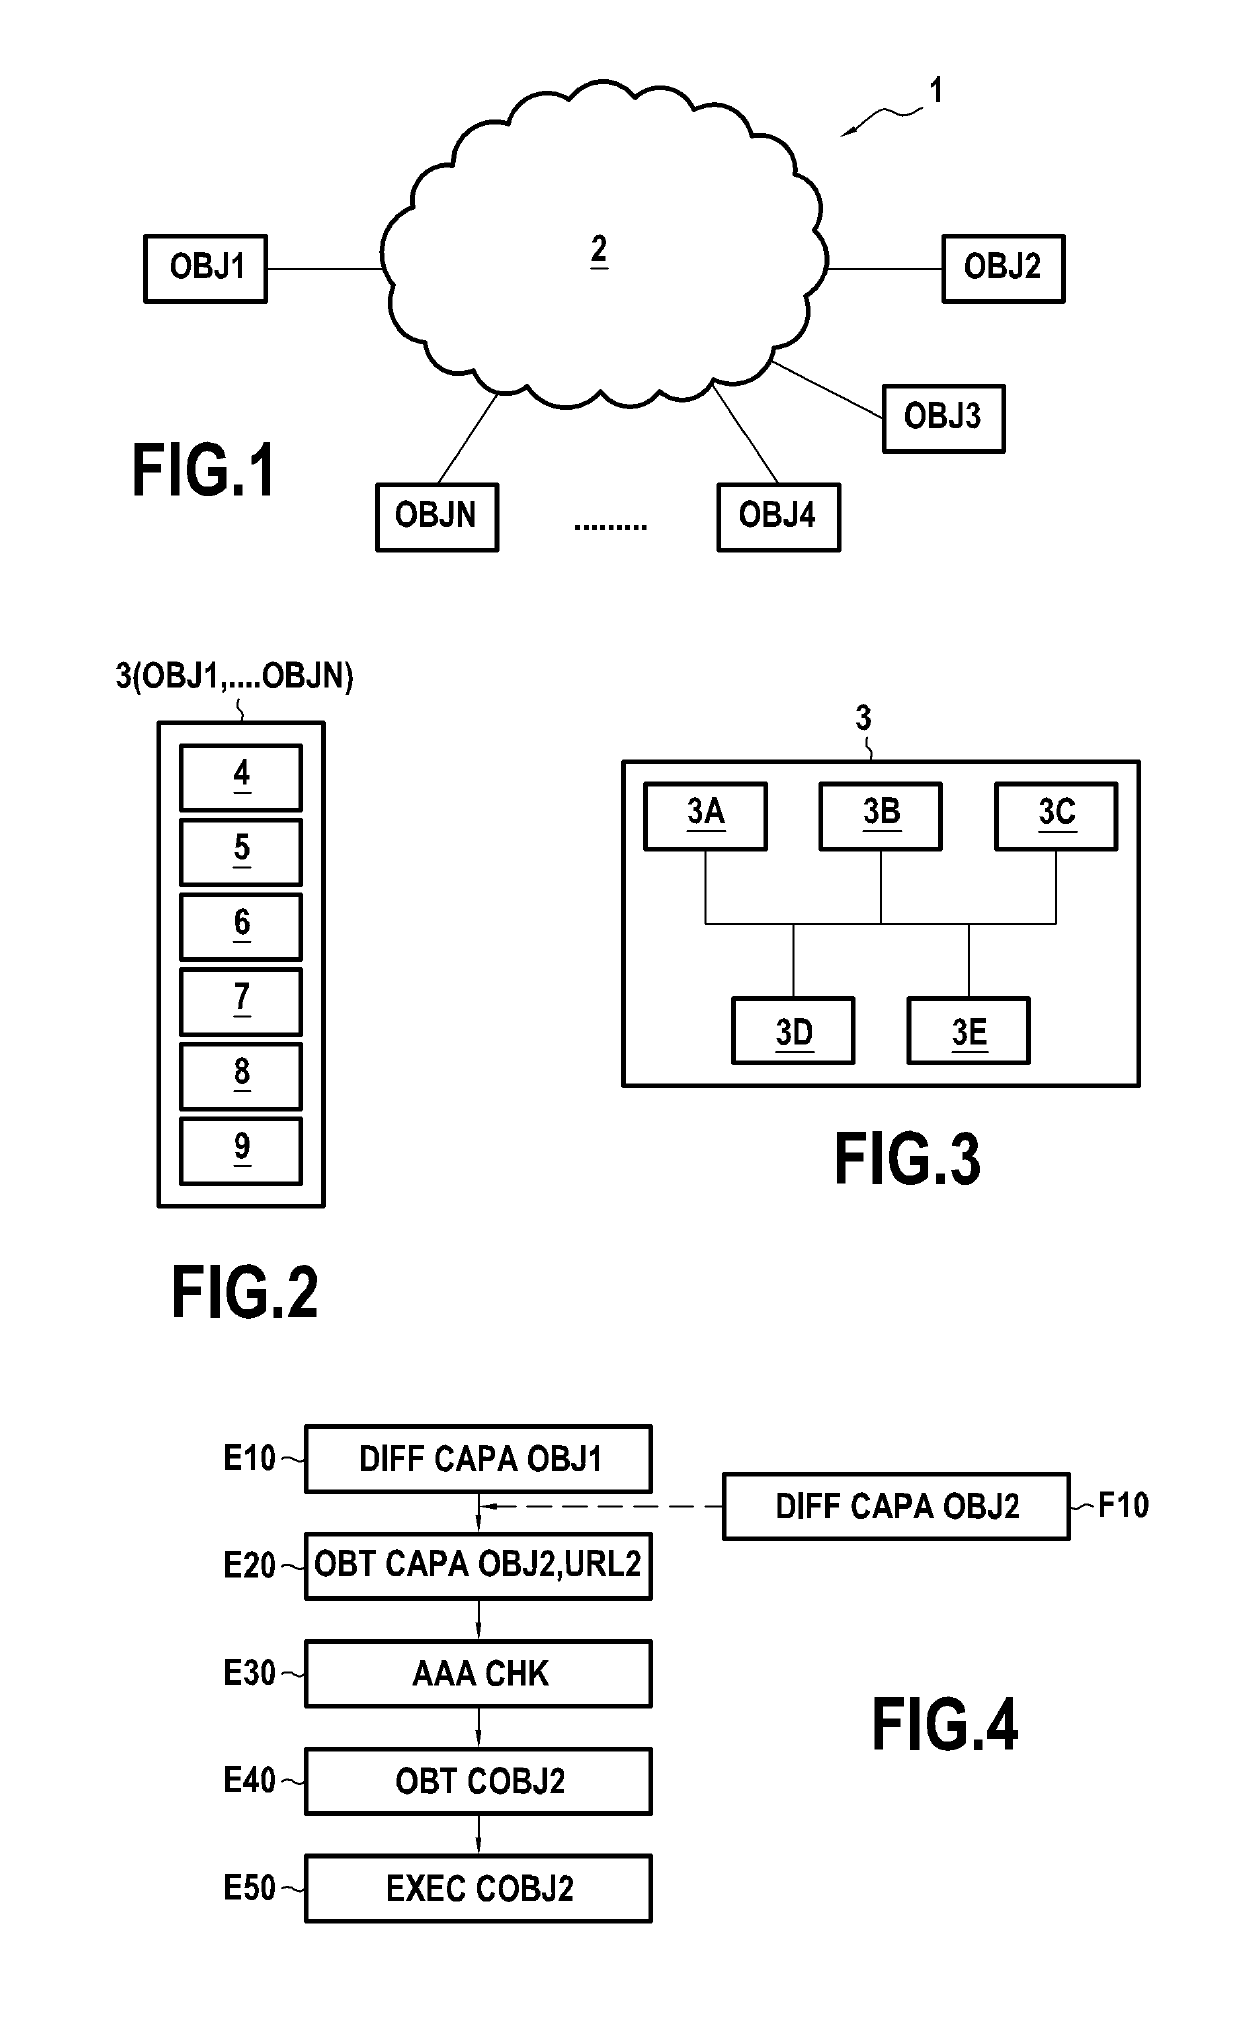 Method and a device for updating the capabilities of an object connected to a communications network